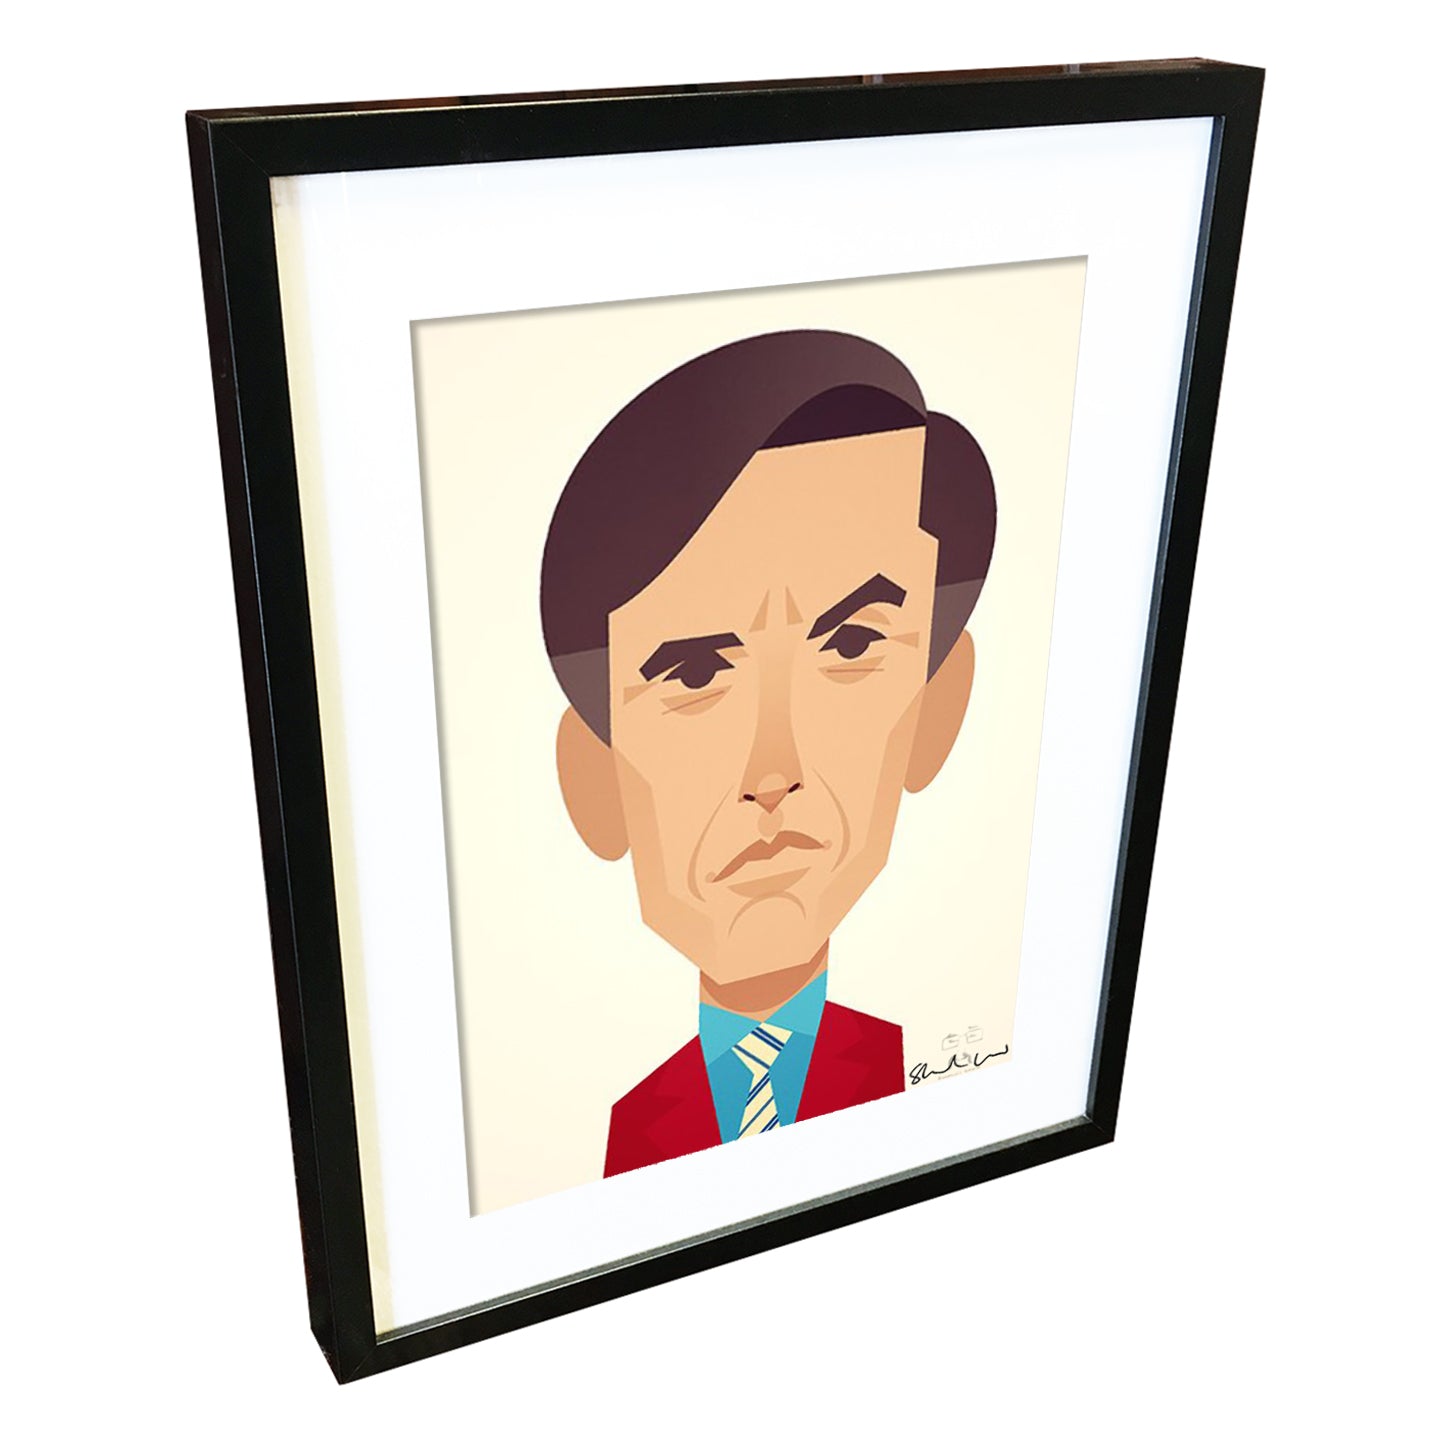 Alan Partridge by Stanley Chow - Signed and stamped fine art print - Egoiste Gallery - Art Gallery in Manchester City Centre